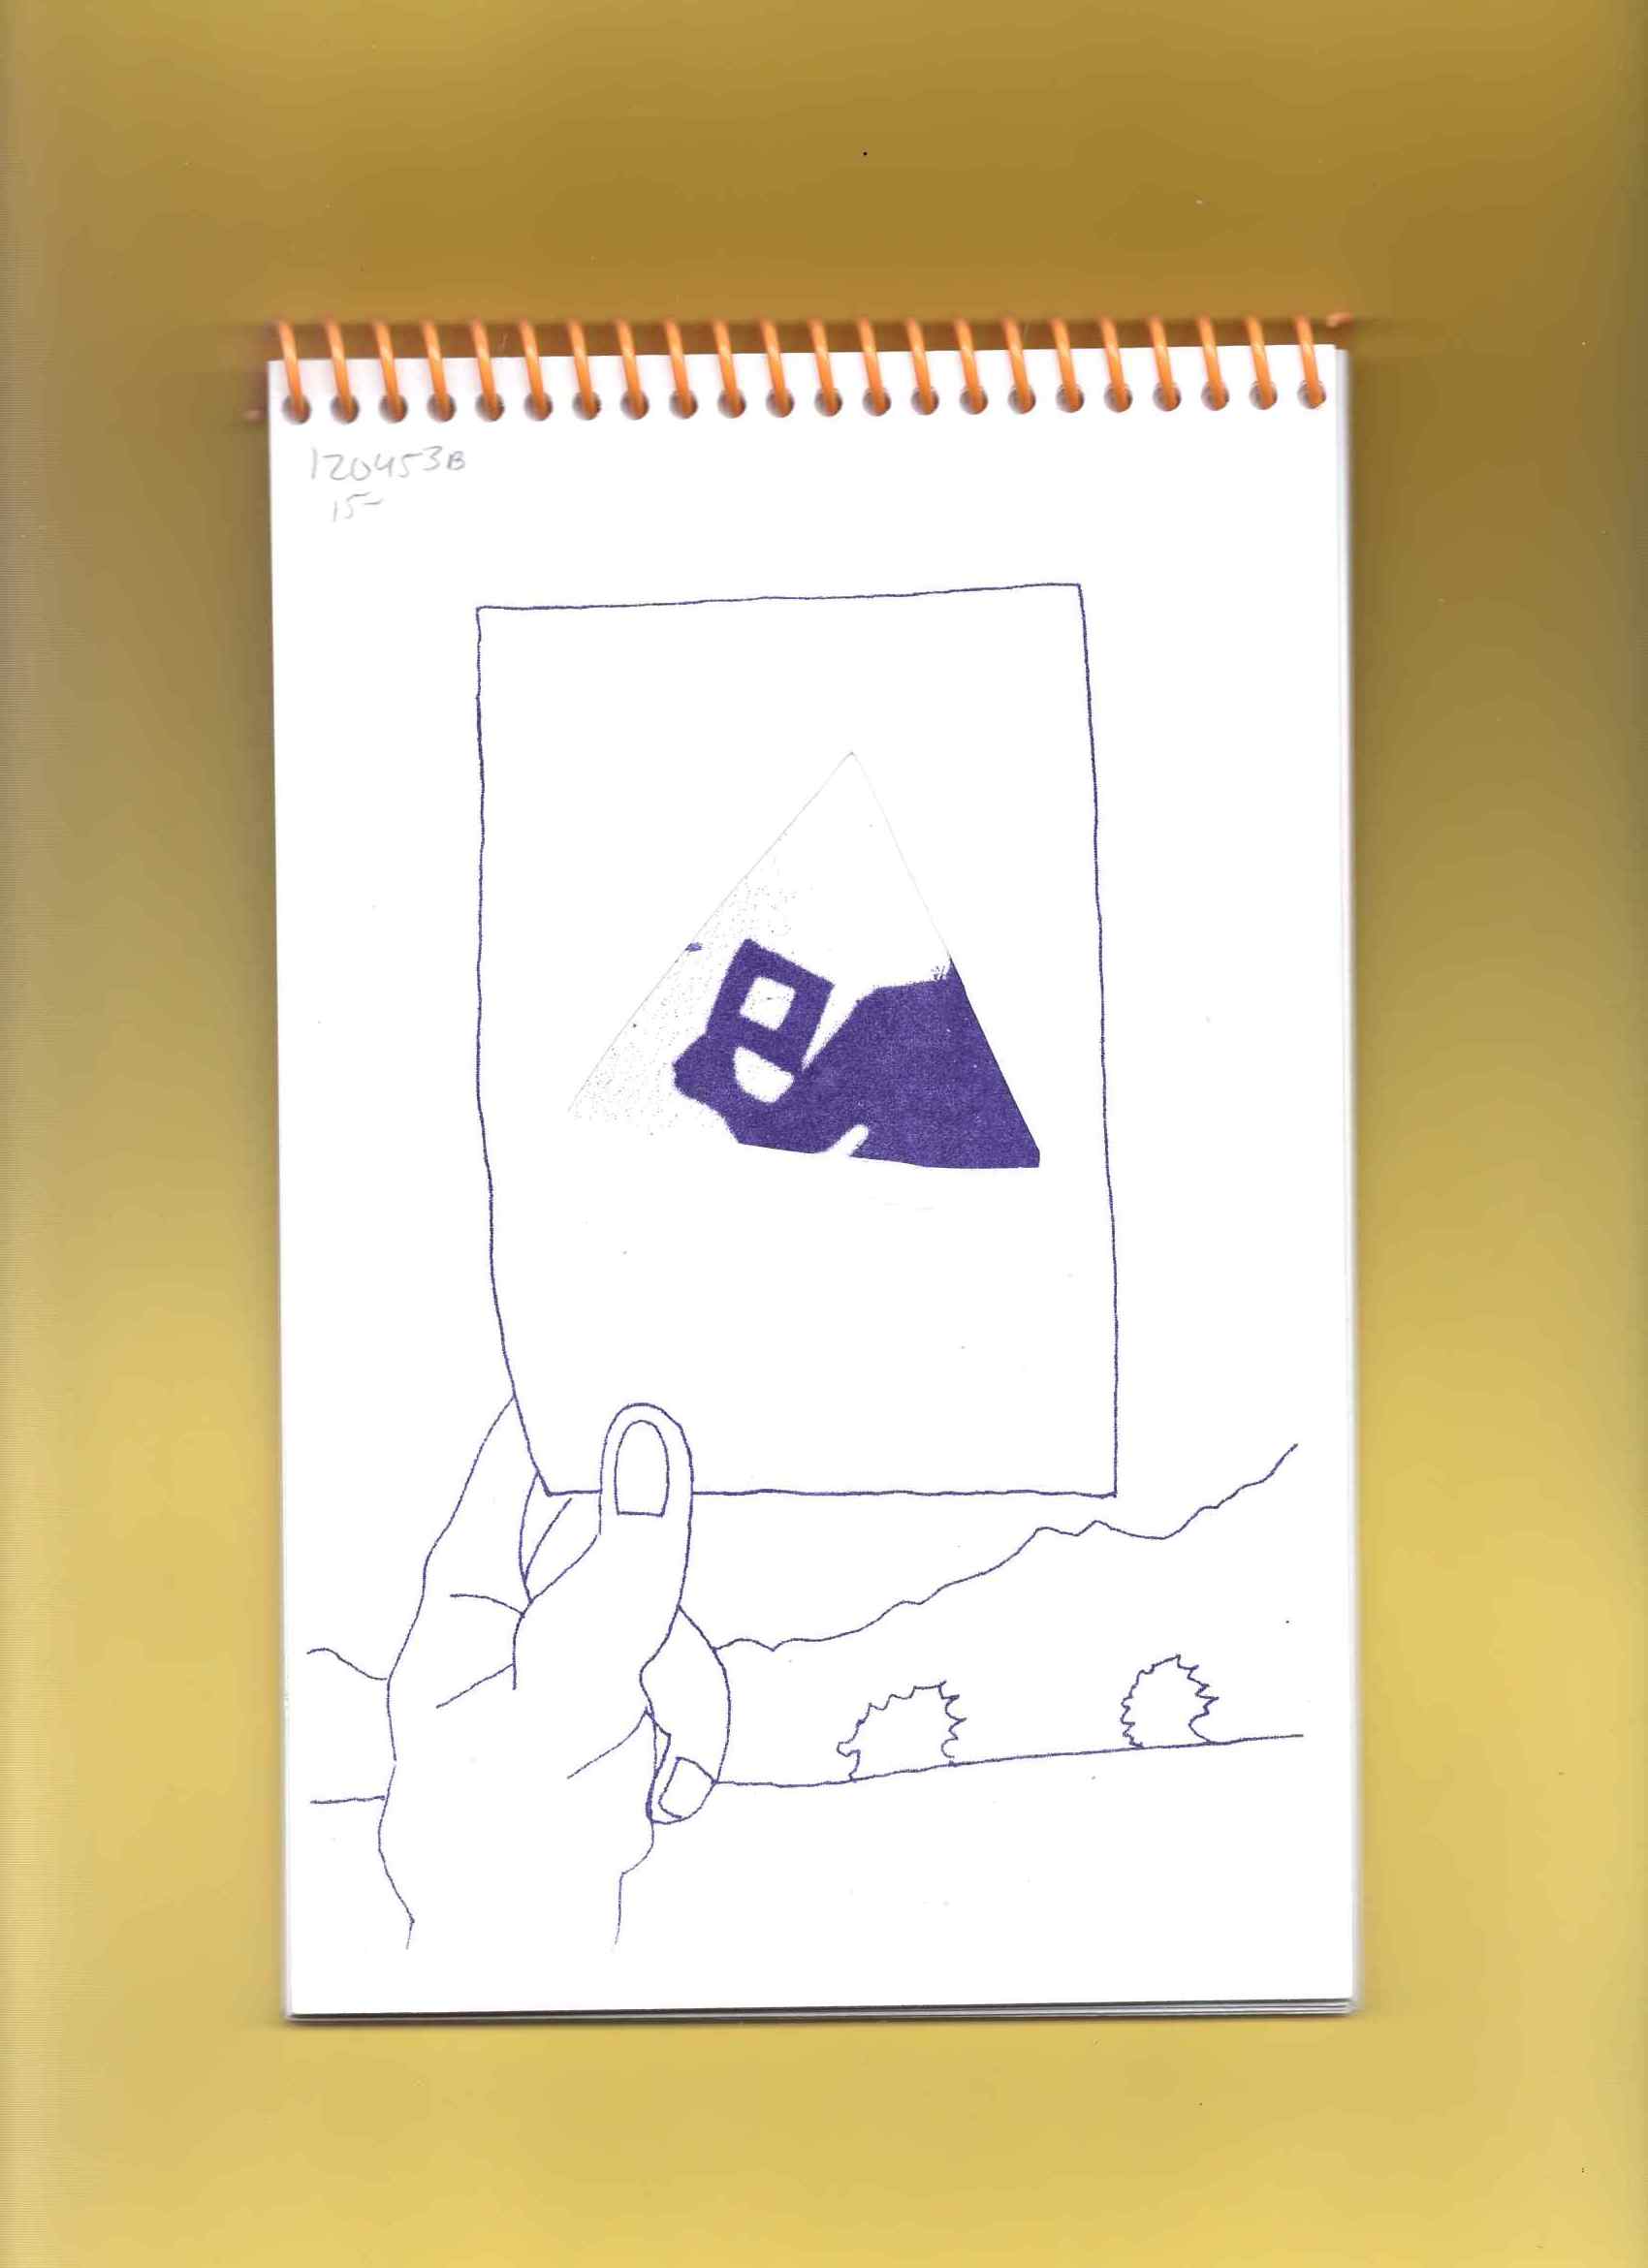 white drawing of a hand holding up a sheet of paper with a triangular cutout in the center, like a viewfinder